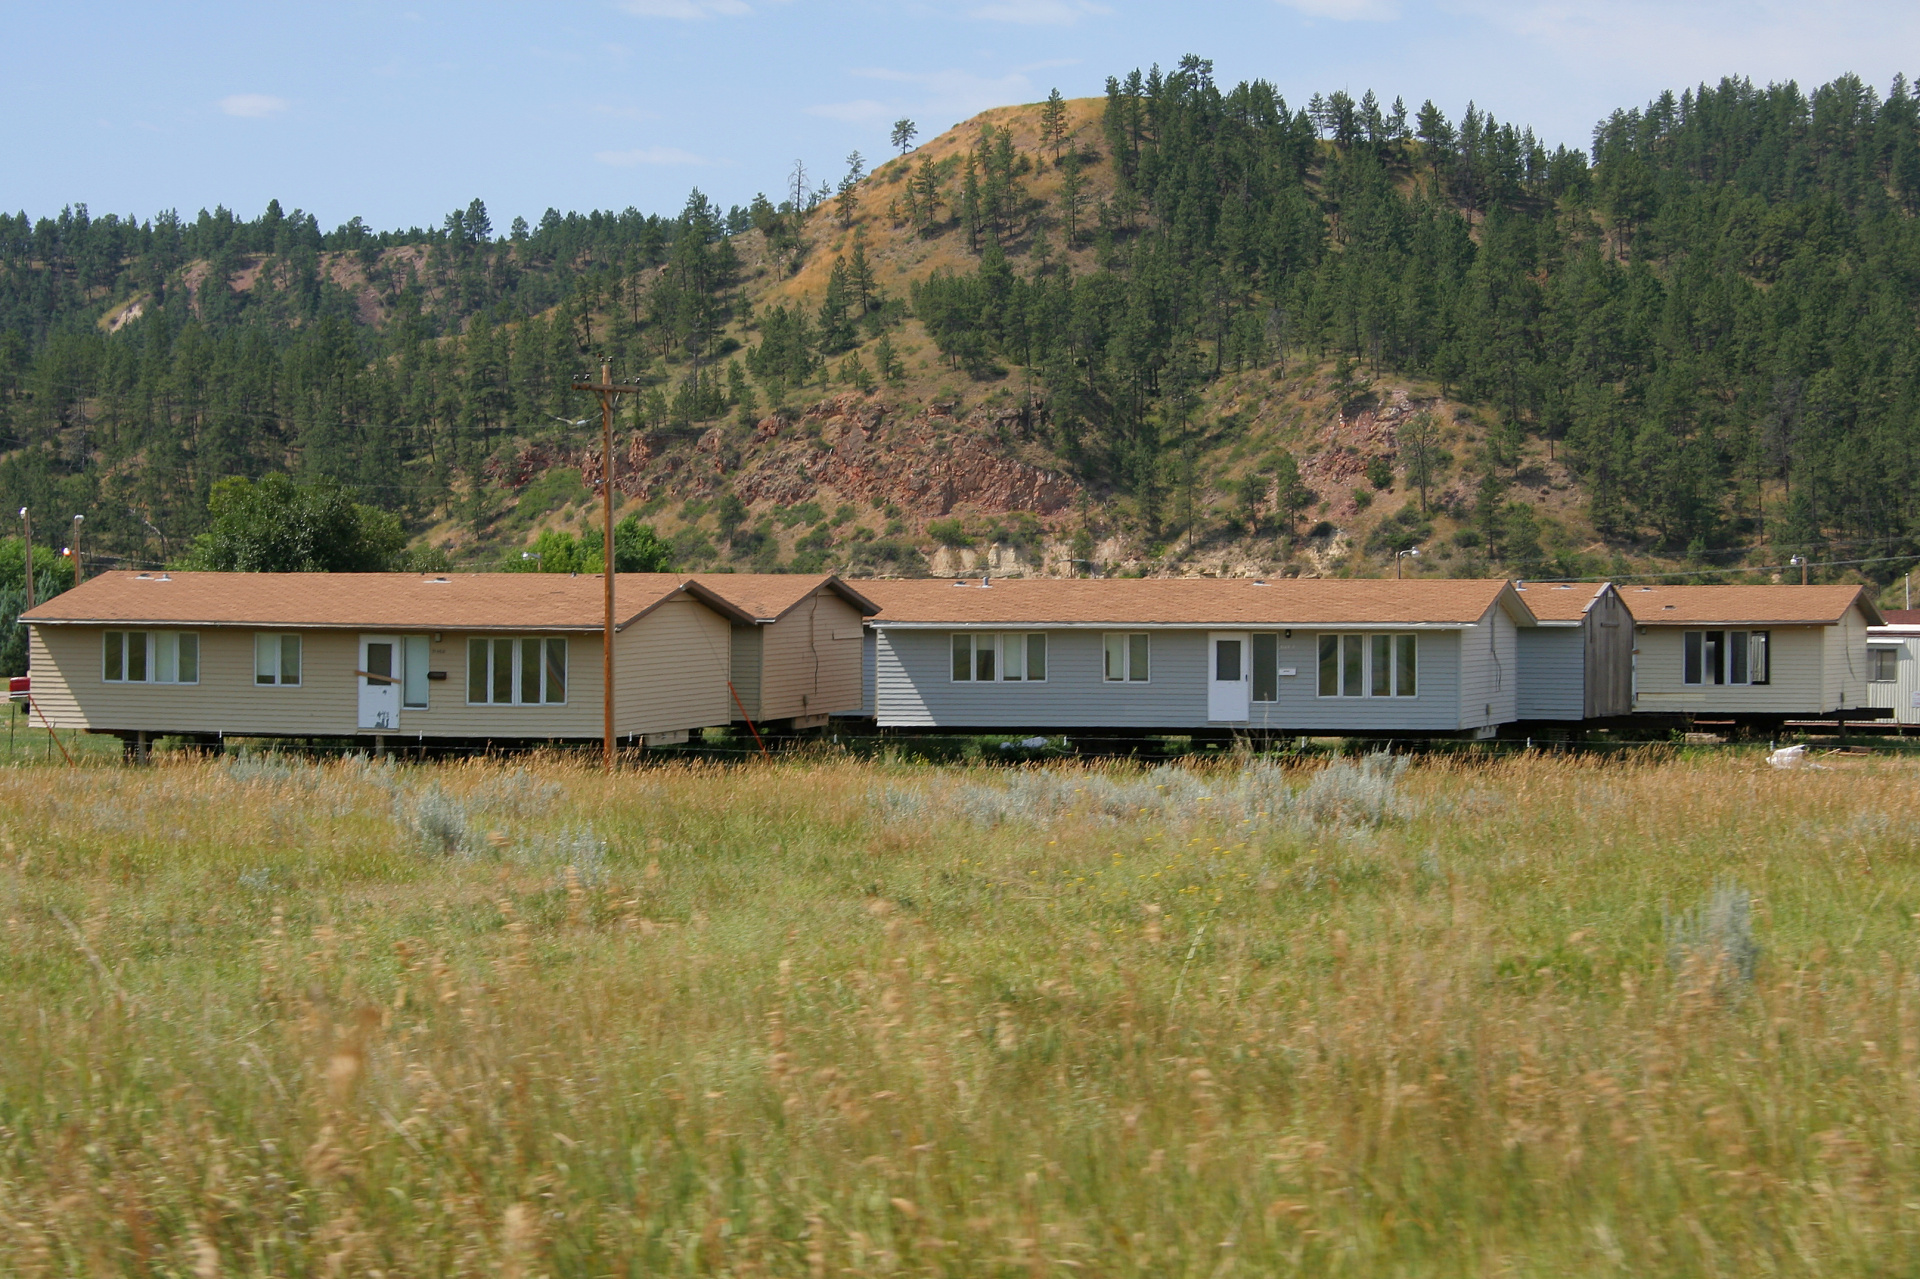 New Houses (Travels » US Trip 1: Cheyenne Country » The Rez » Lame Deer)